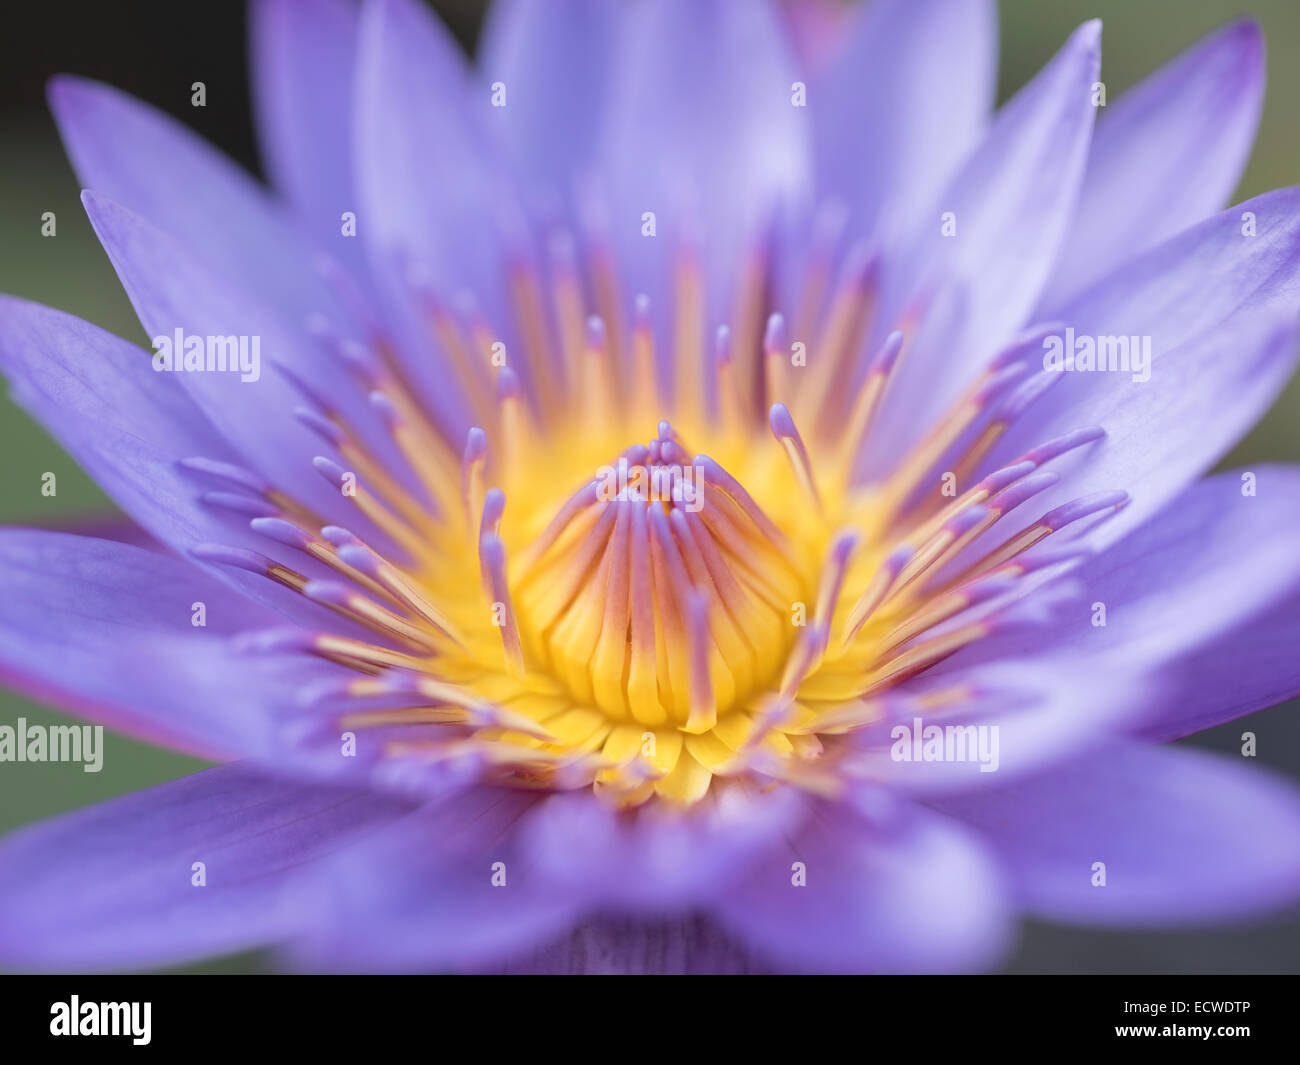 Water lily, Nymphaeaceae, water lilies, flower Stock Photo